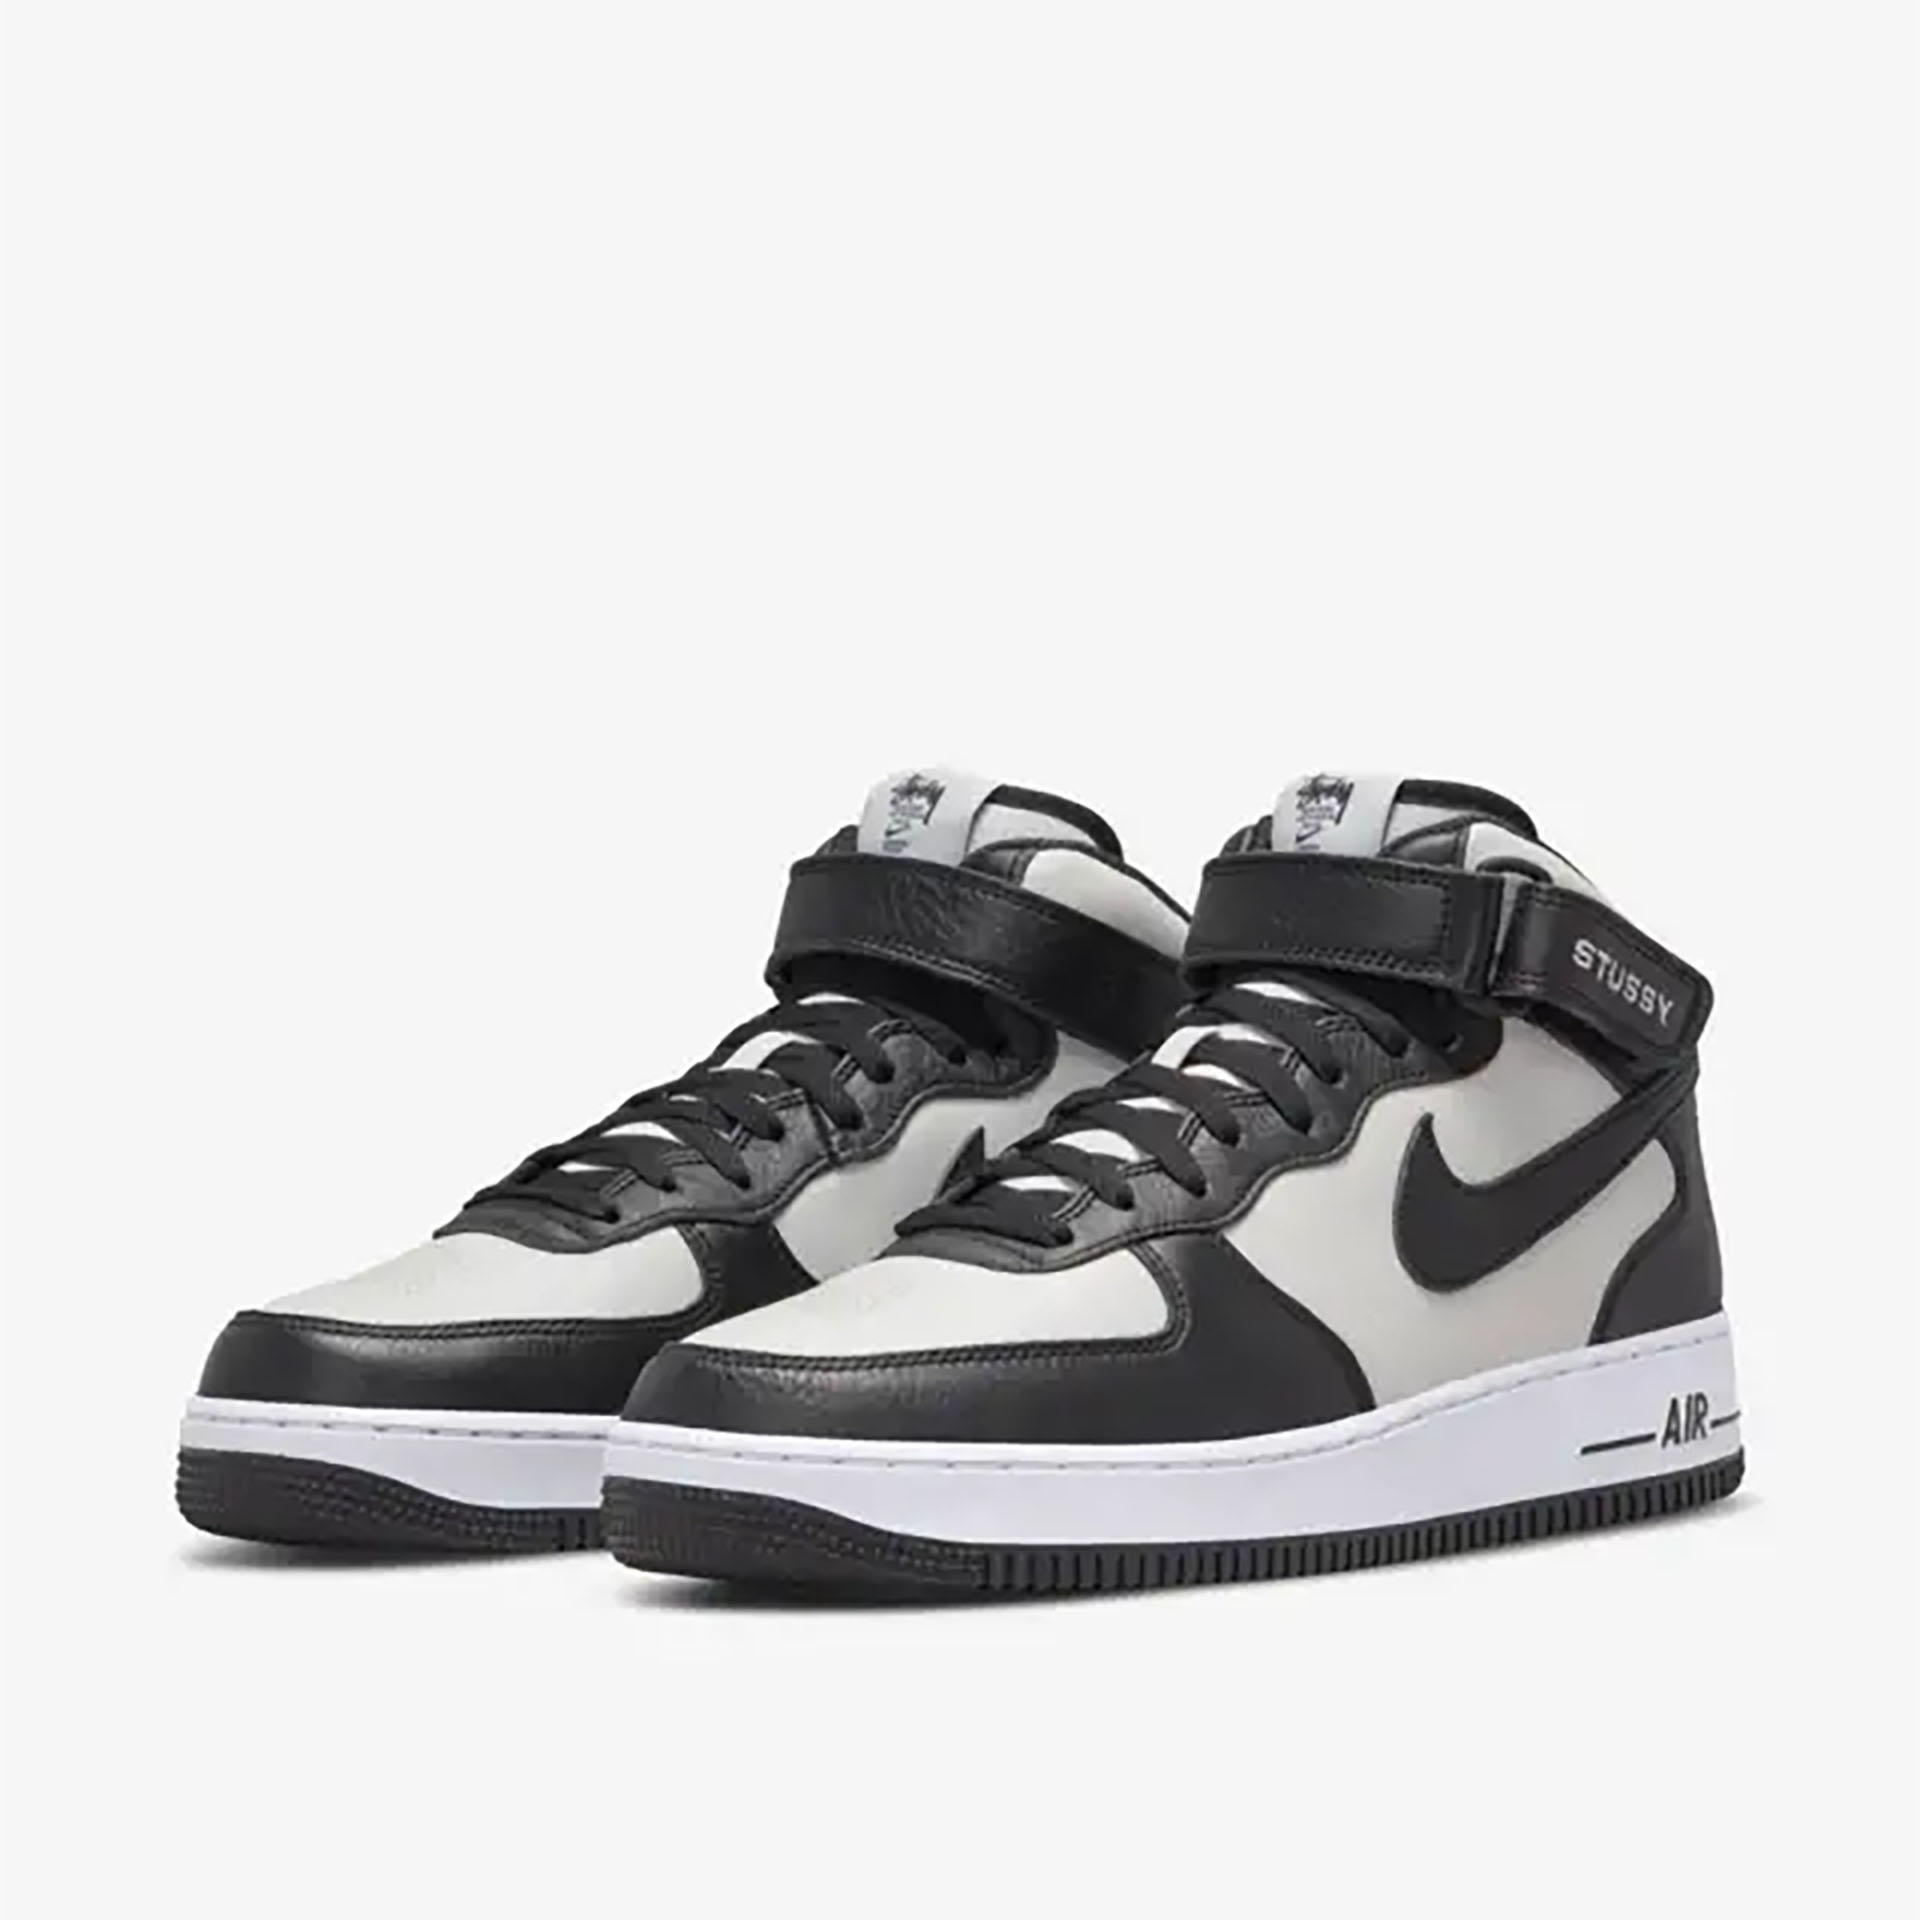 AIR FORCE 1 MID x STUSSY 'Black and Light Bone' ｜ FLY BASKETBALL 